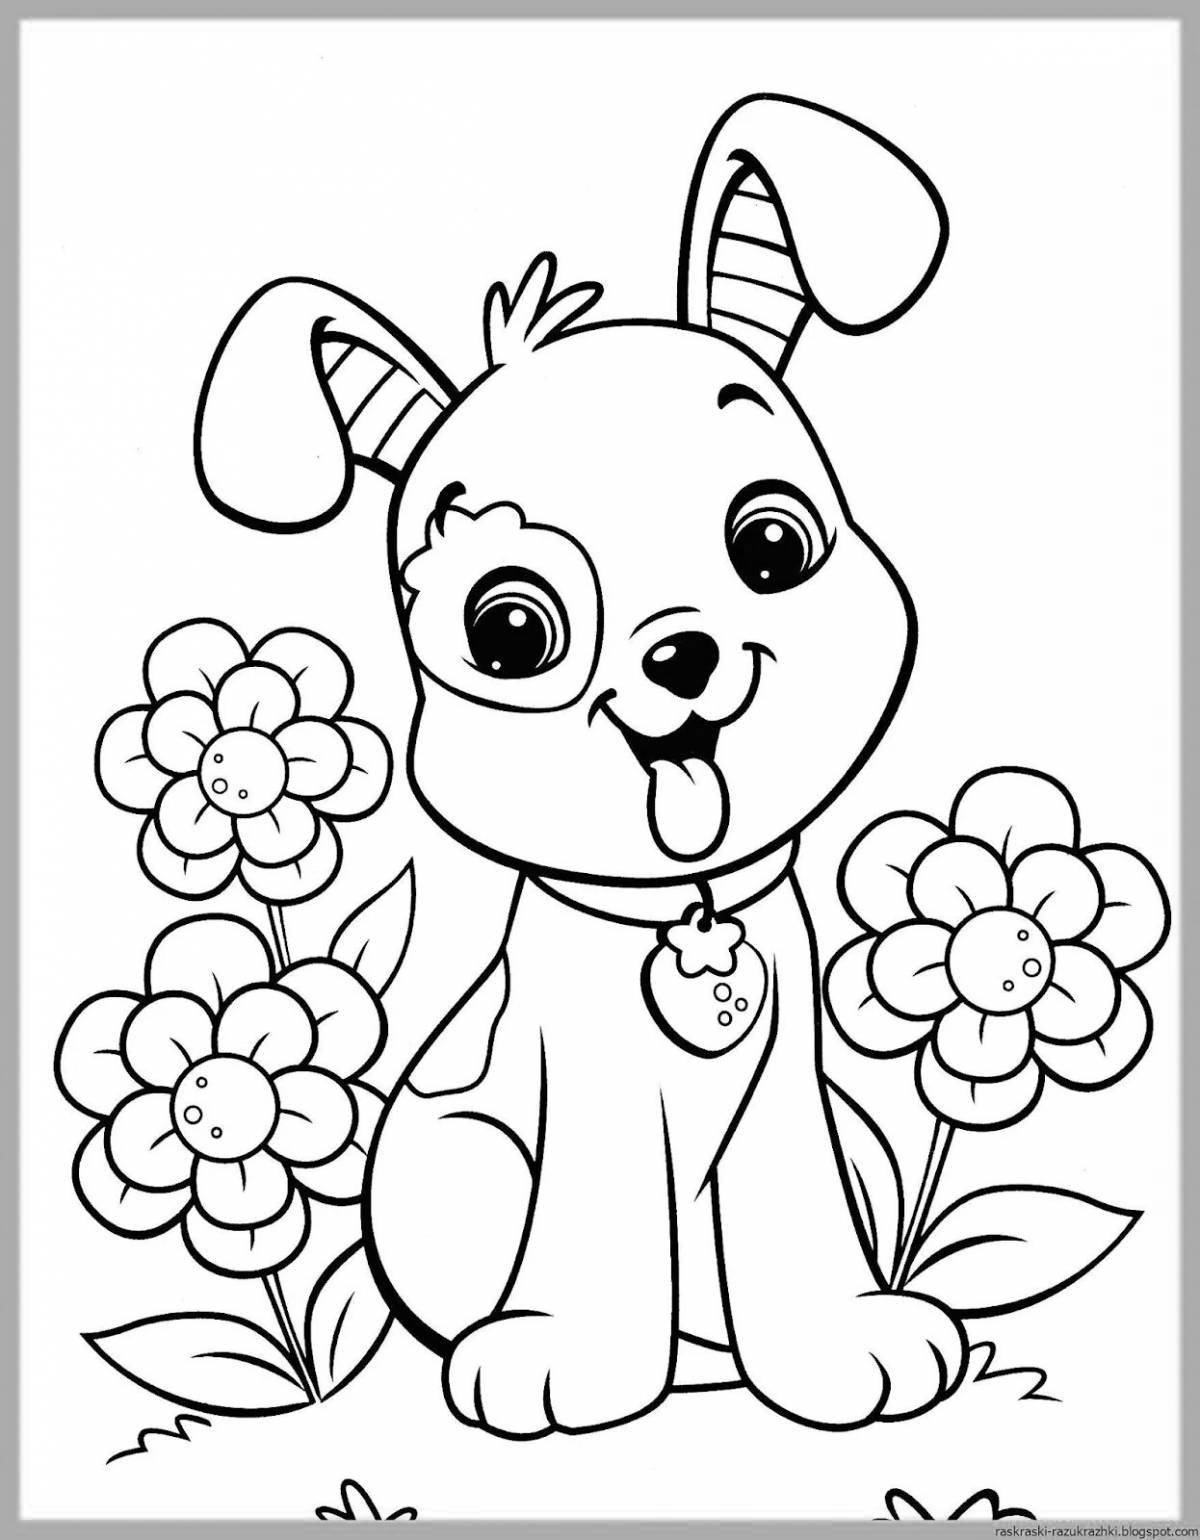 Witty animal dog coloring pages